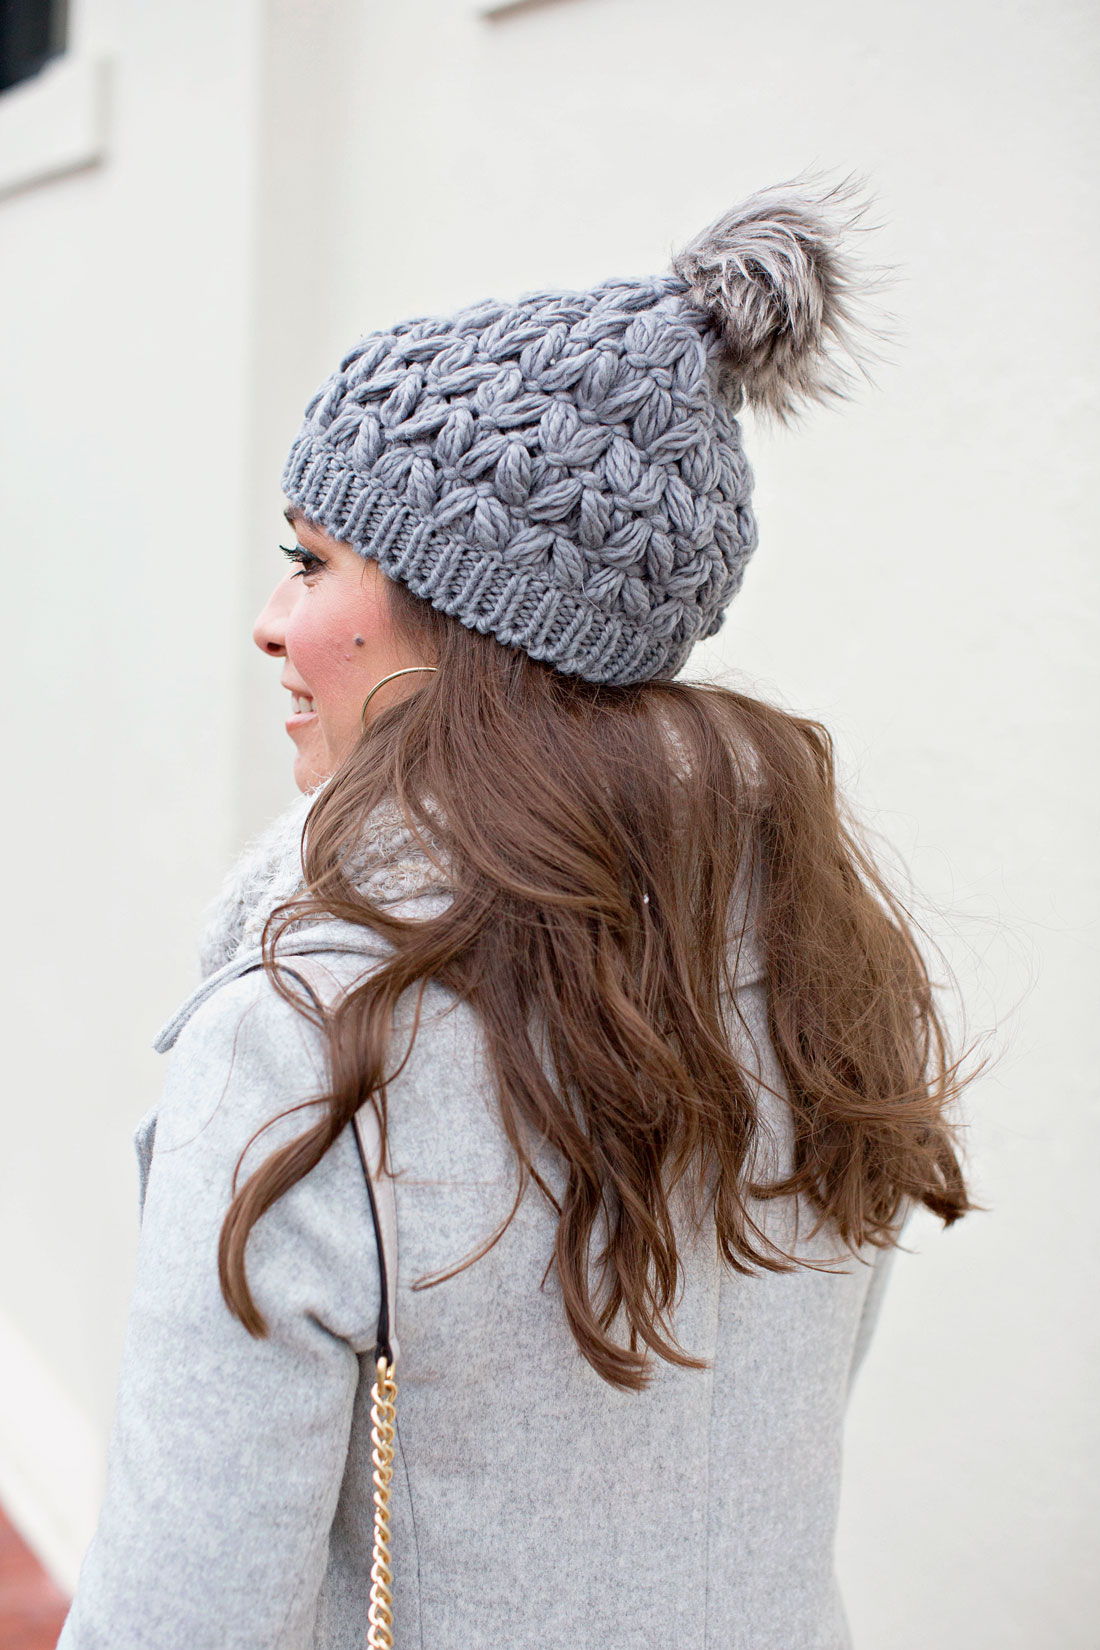 Amanda from A Glam Lifestyle blog wears BP grey beanie from Nordstrom with her travel outfits